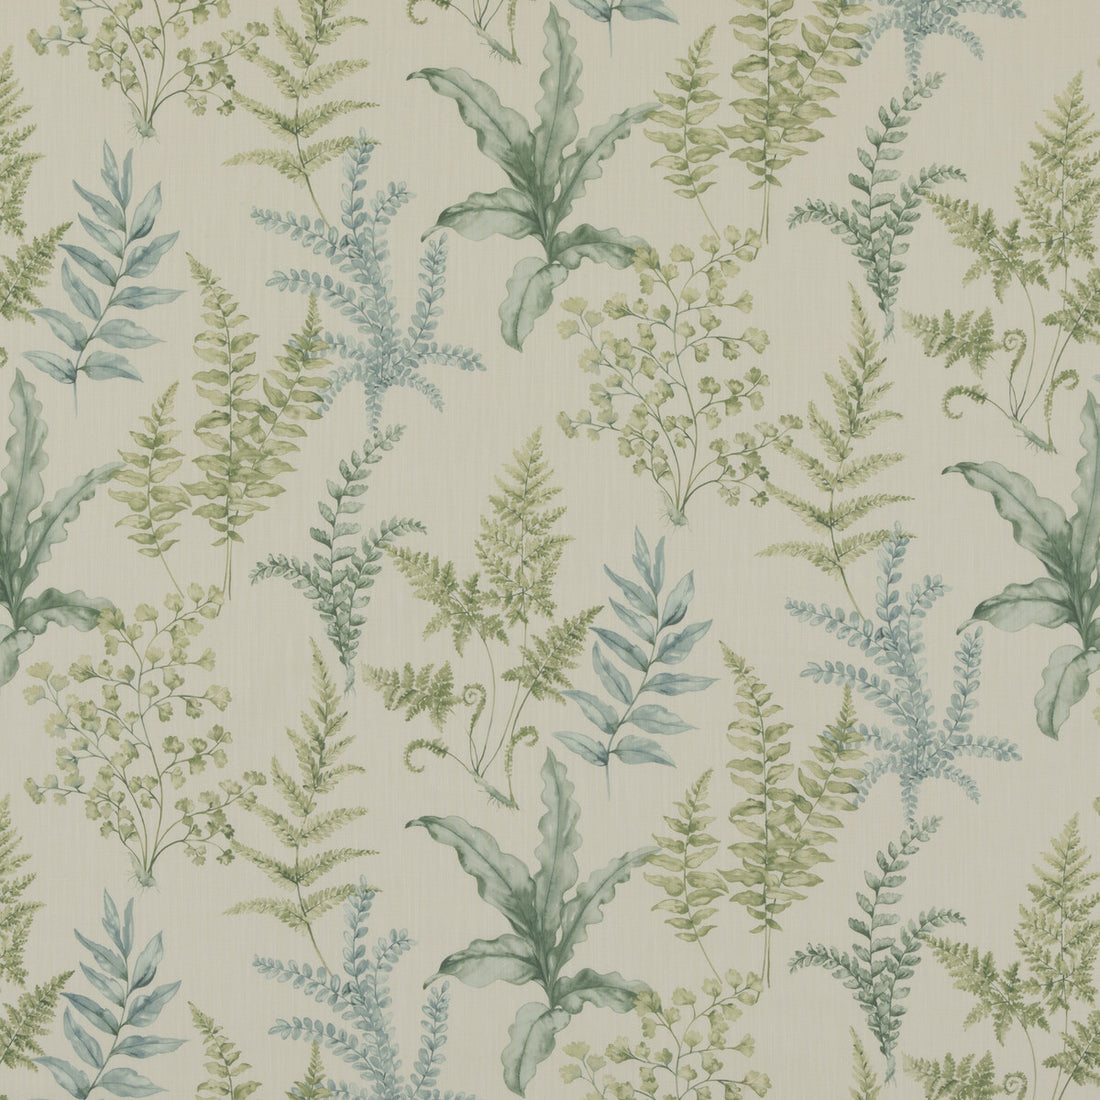 Ferndown fabric in aqua color - pattern PP50503.2.0 - by Baker Lifestyle in the Bridport collection